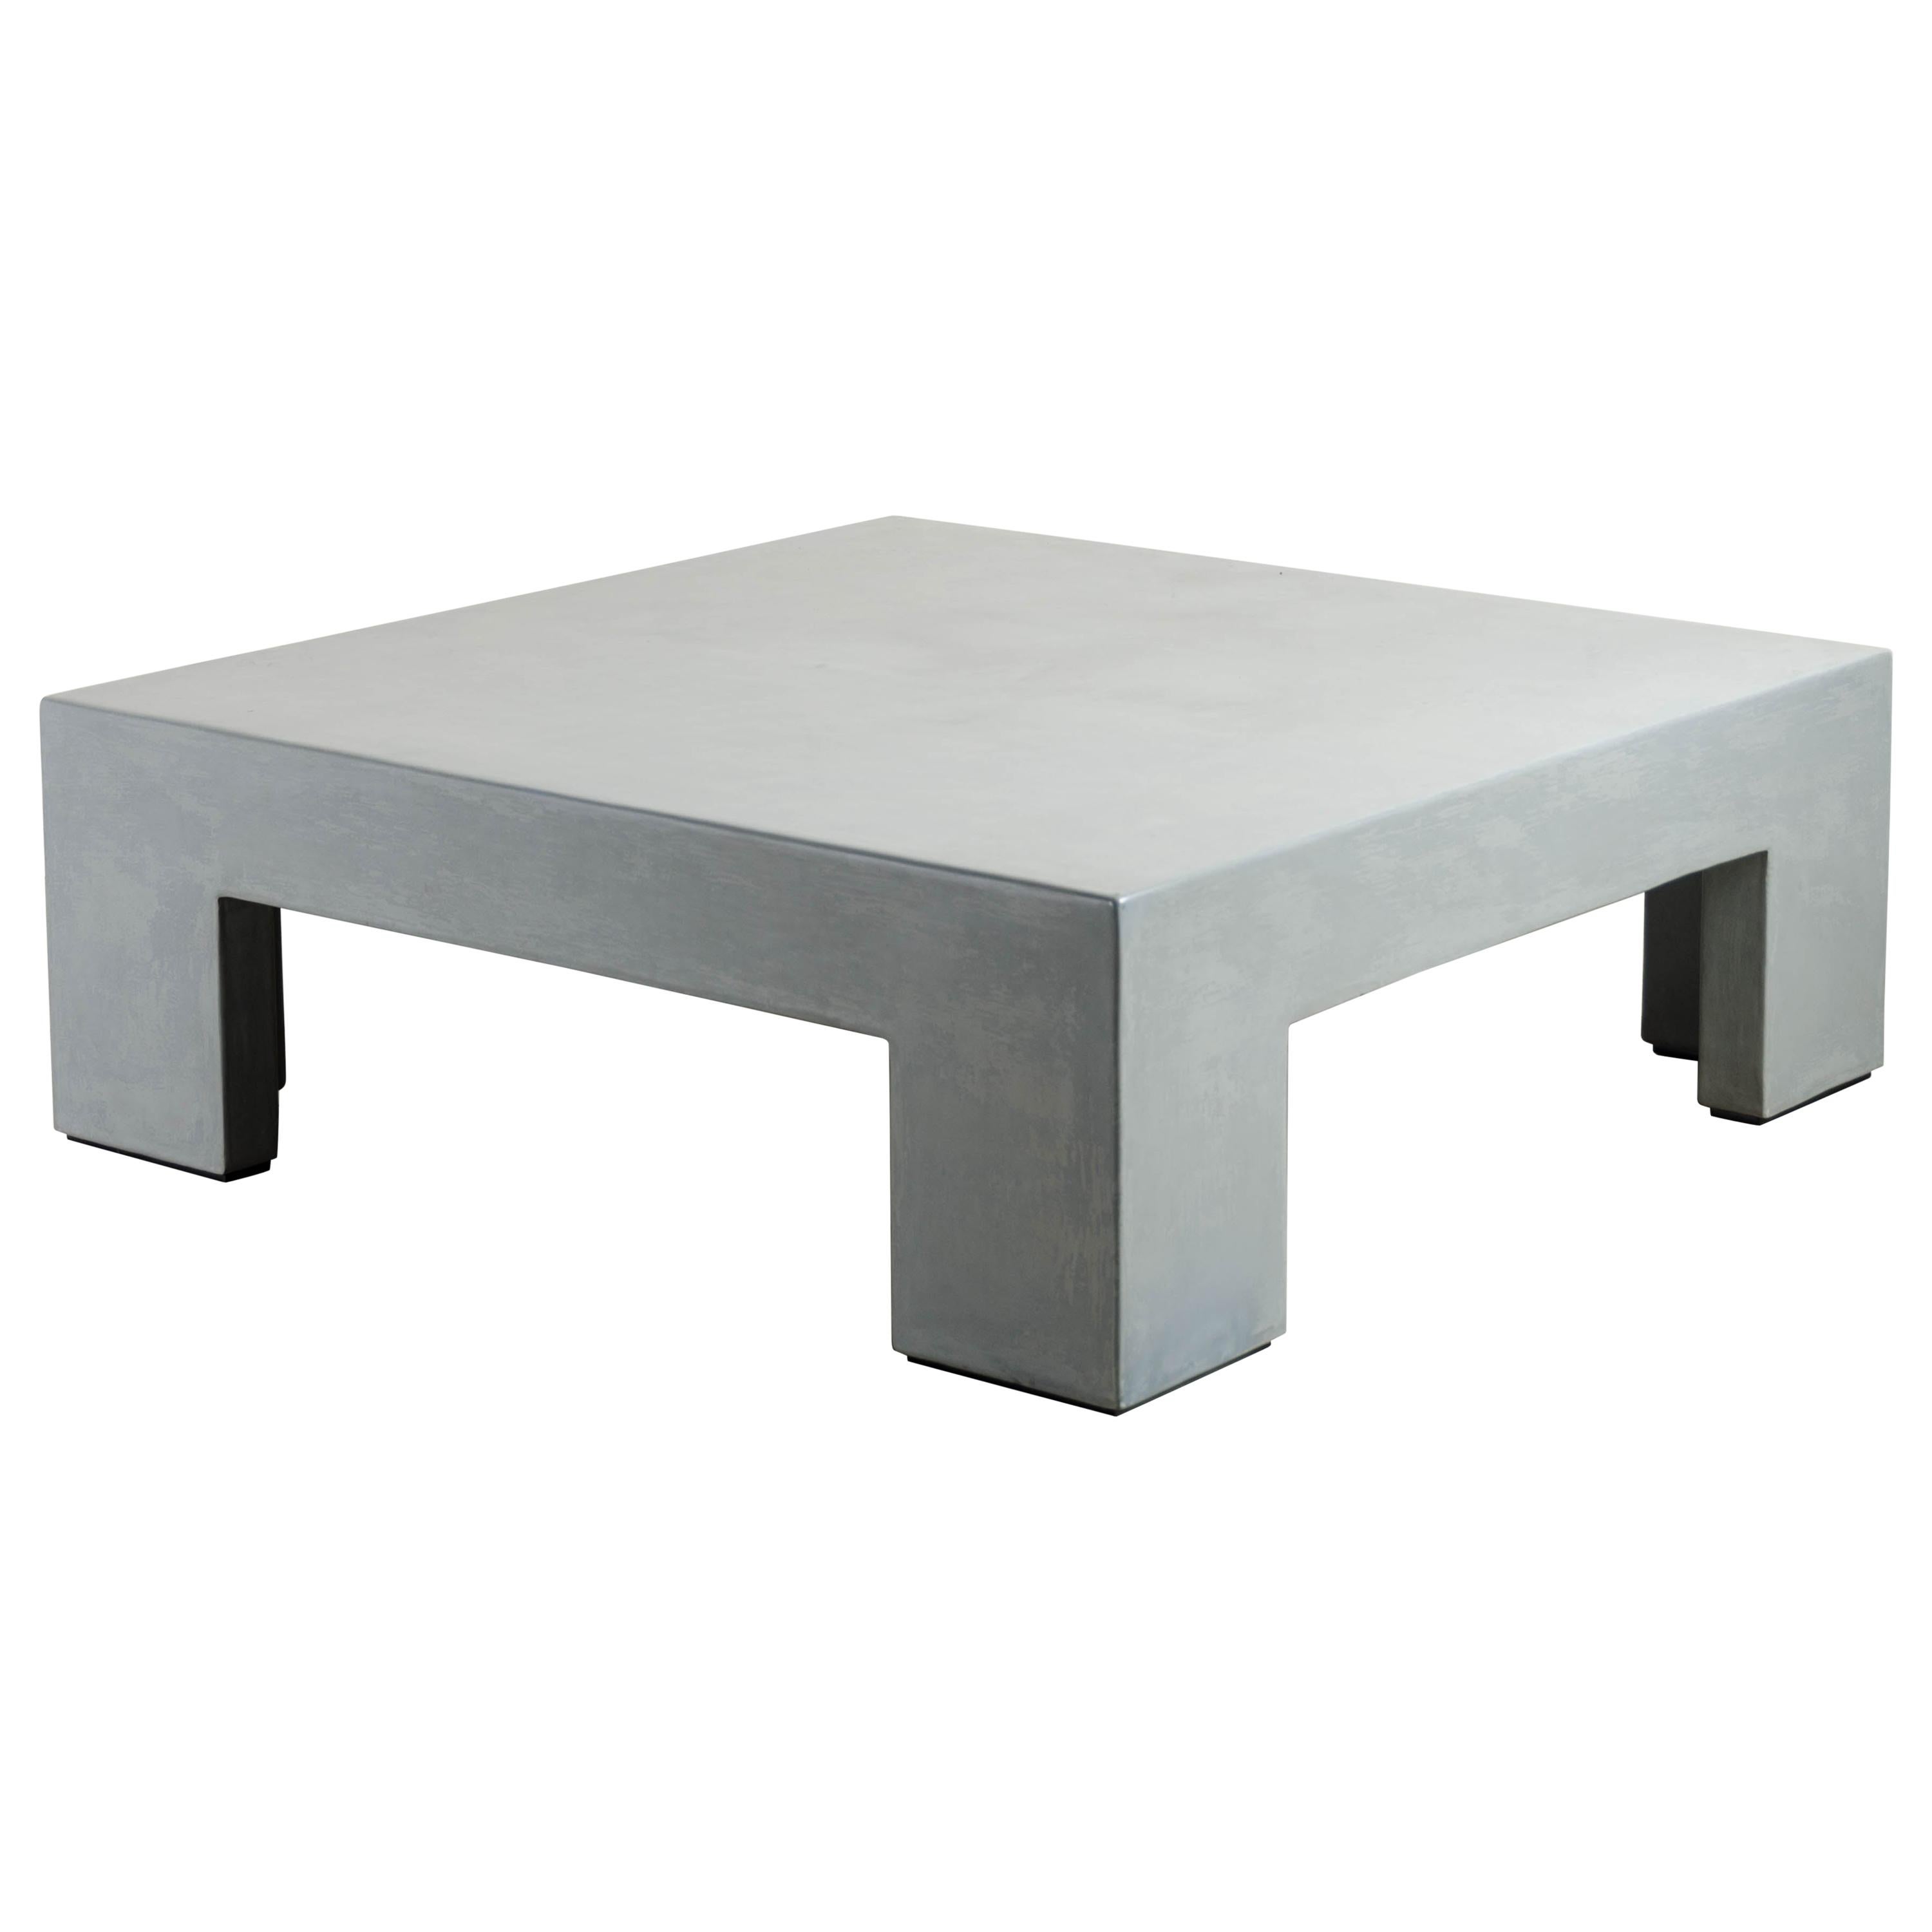 Low Square Table in Grey Lacquer by Robert Kuo, Limited Edition